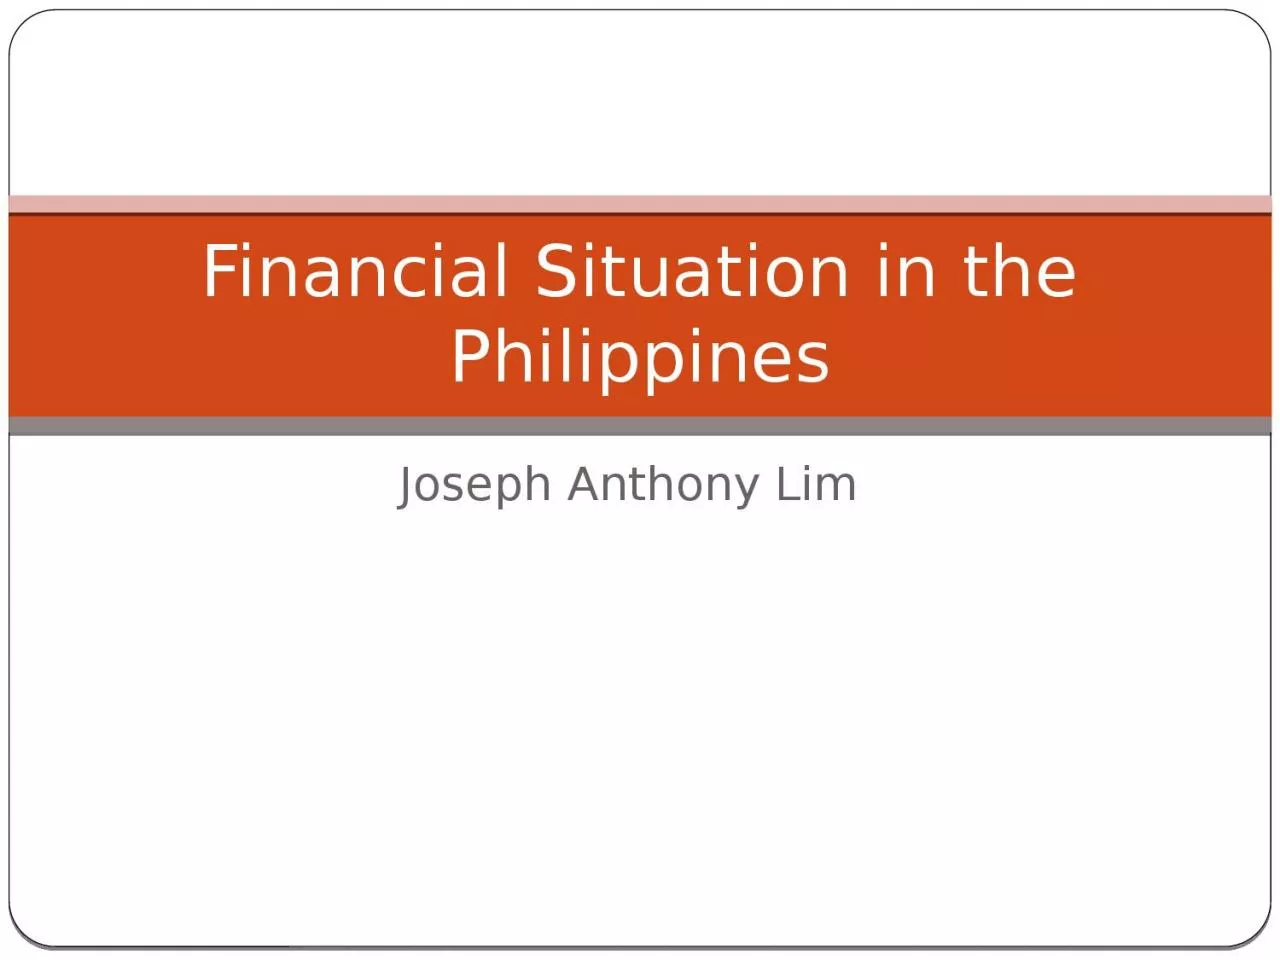 Joseph Anthony Lim Financial Situation in the Philippines